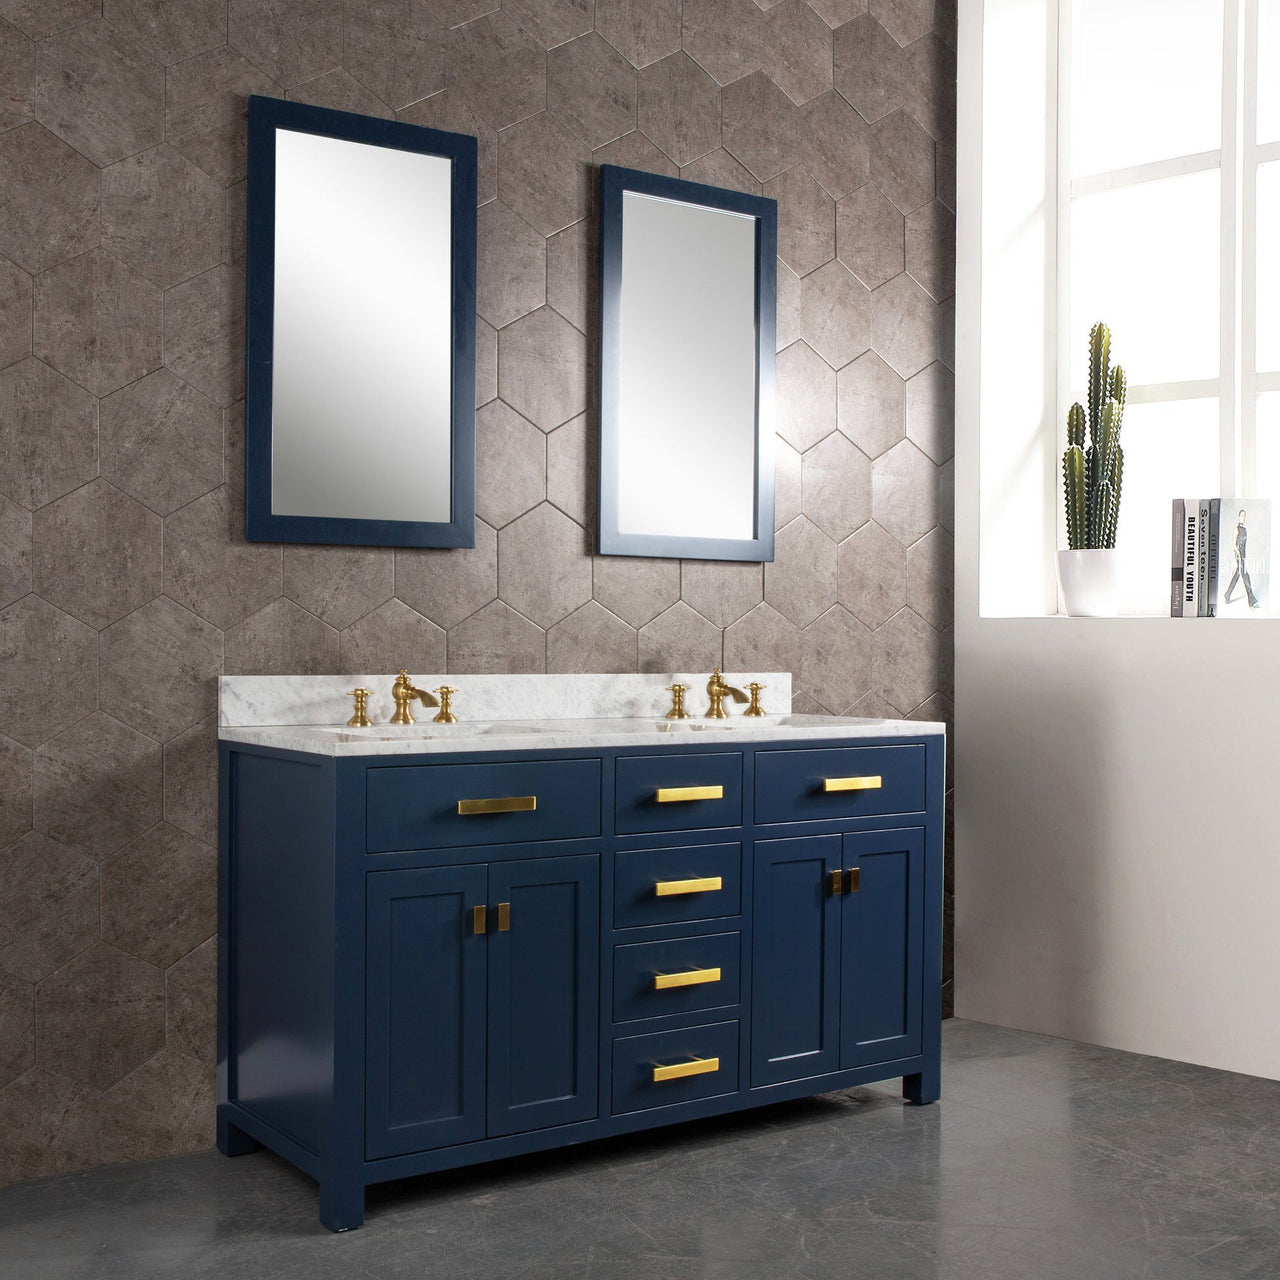 Madison 60-Inch Double Sink Carrara White Marble Vanity In Monarch BlueWith Matching Mirror(s) and F2-0013-06-FX Lavatory Faucet(s) Vanity Water Creation 